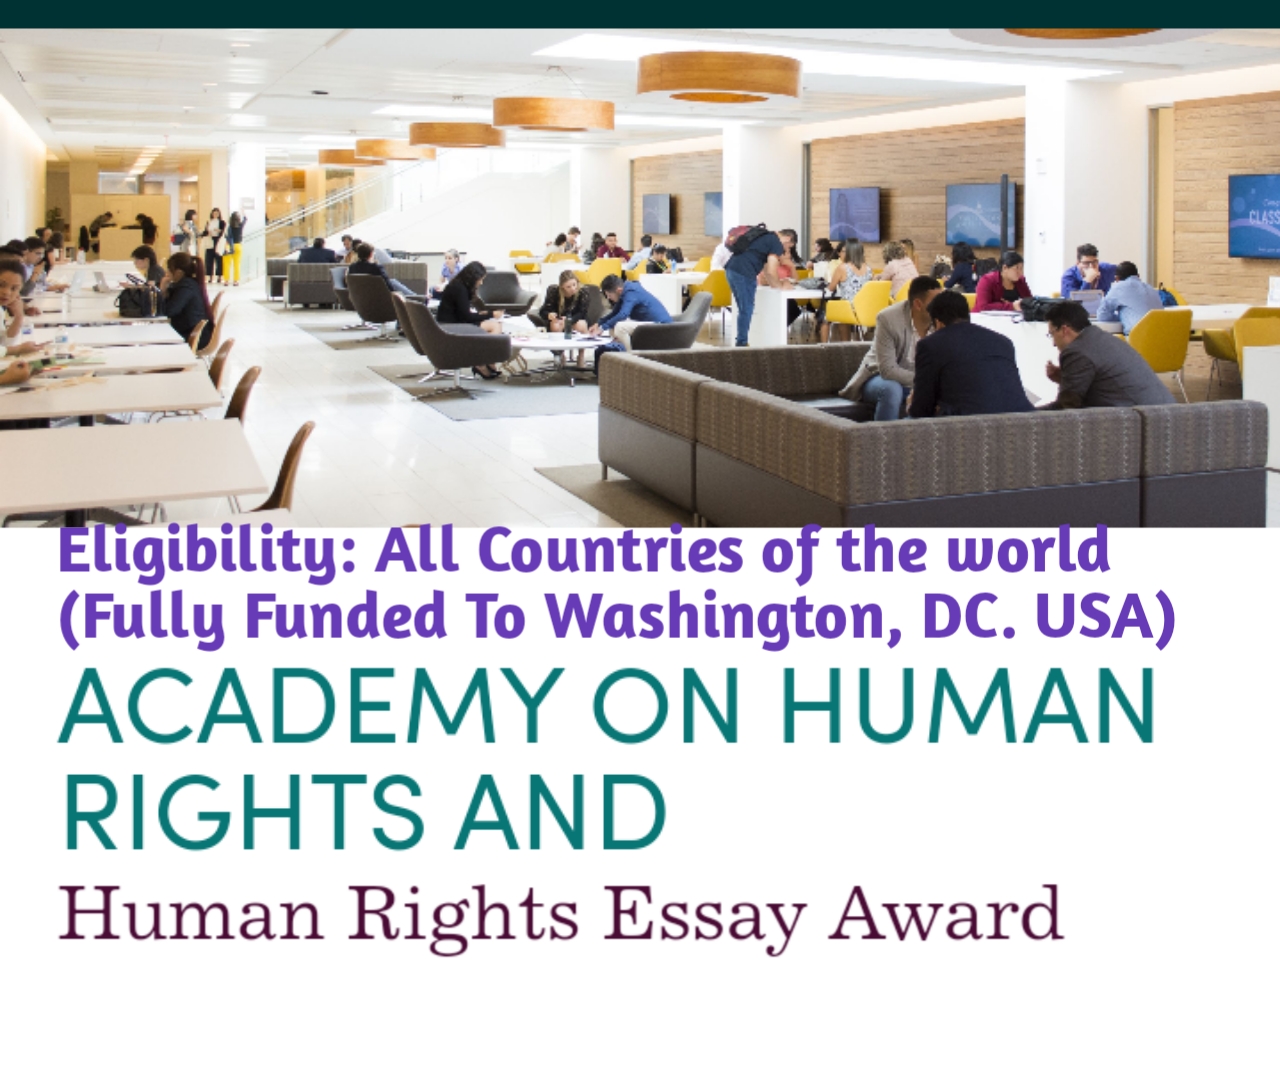 20221025 124905 - Human Right Essay Award (Fully Funded to Washington DC, USA) All Countries